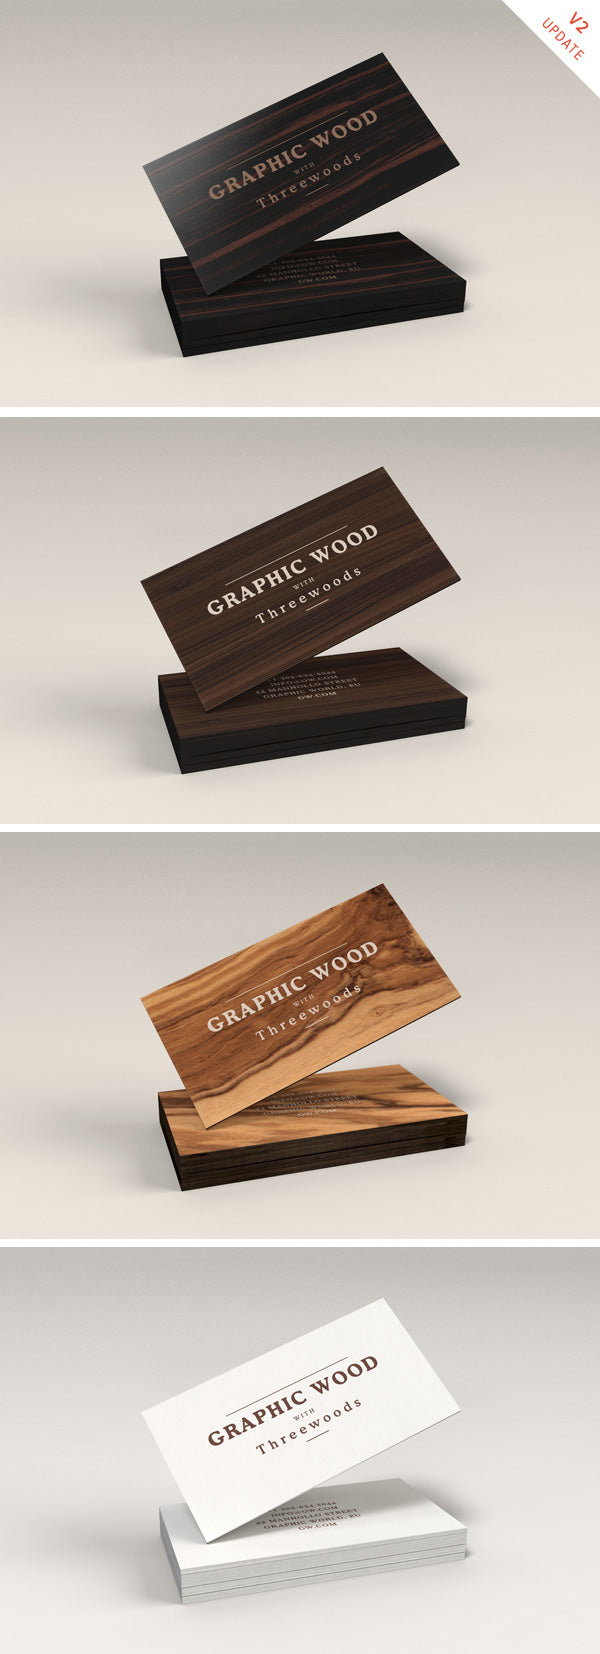 Free Wooden Business Cards MockUp